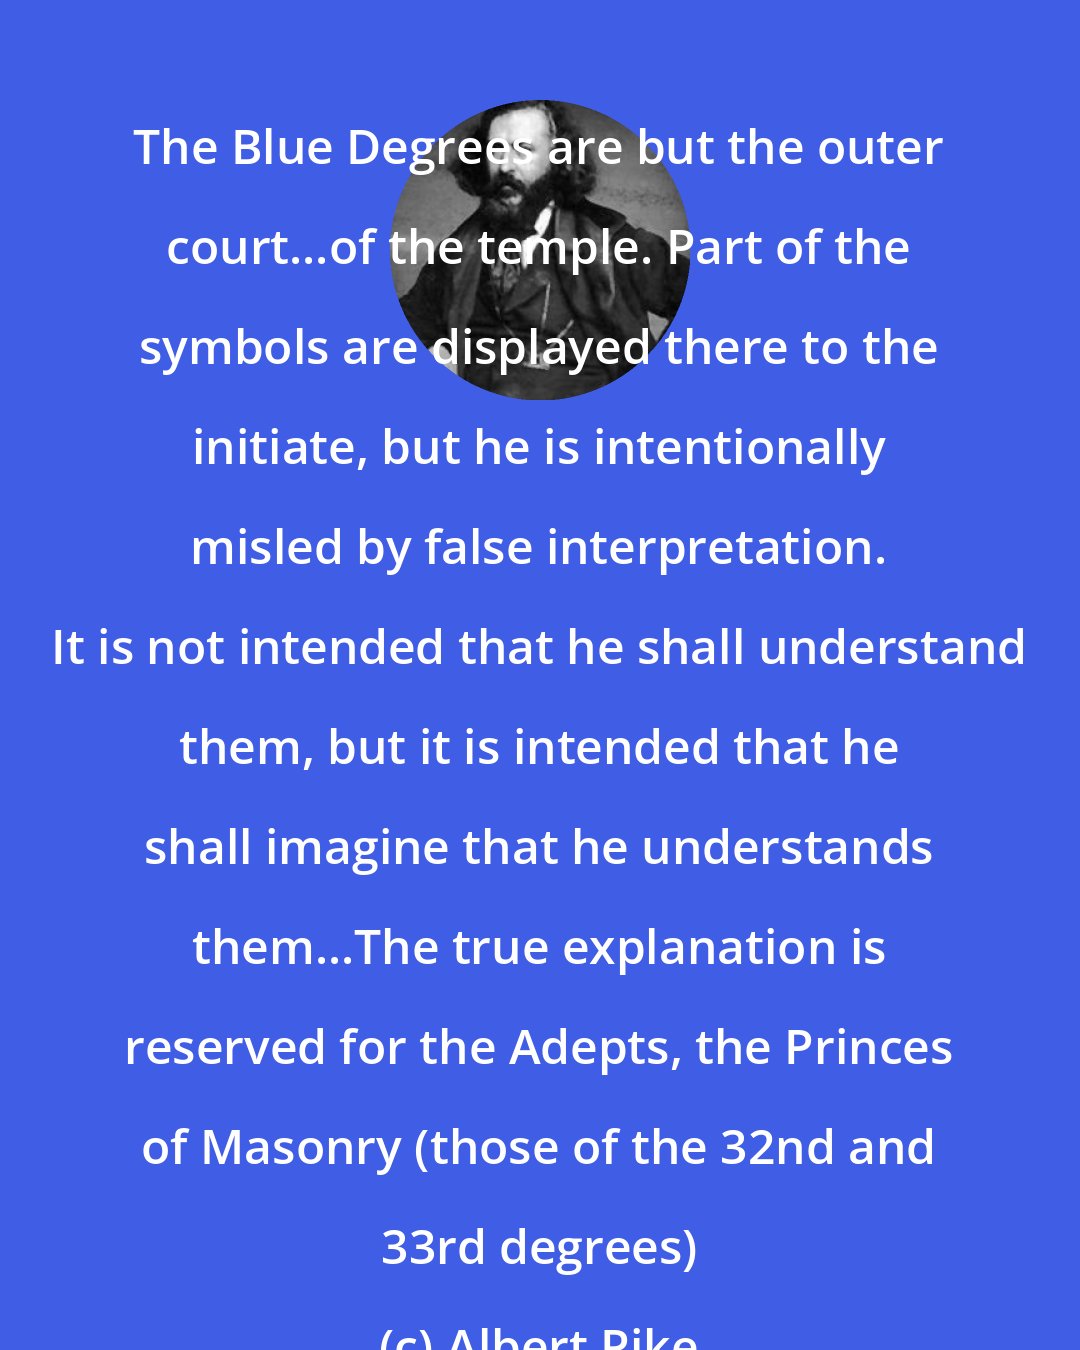 Albert Pike: The Blue Degrees are but the outer court...of the temple. Part of the symbols are displayed there to the initiate, but he is intentionally misled by false interpretation. It is not intended that he shall understand them, but it is intended that he shall imagine that he understands them...The true explanation is reserved for the Adepts, the Princes of Masonry (those of the 32nd and 33rd degrees)